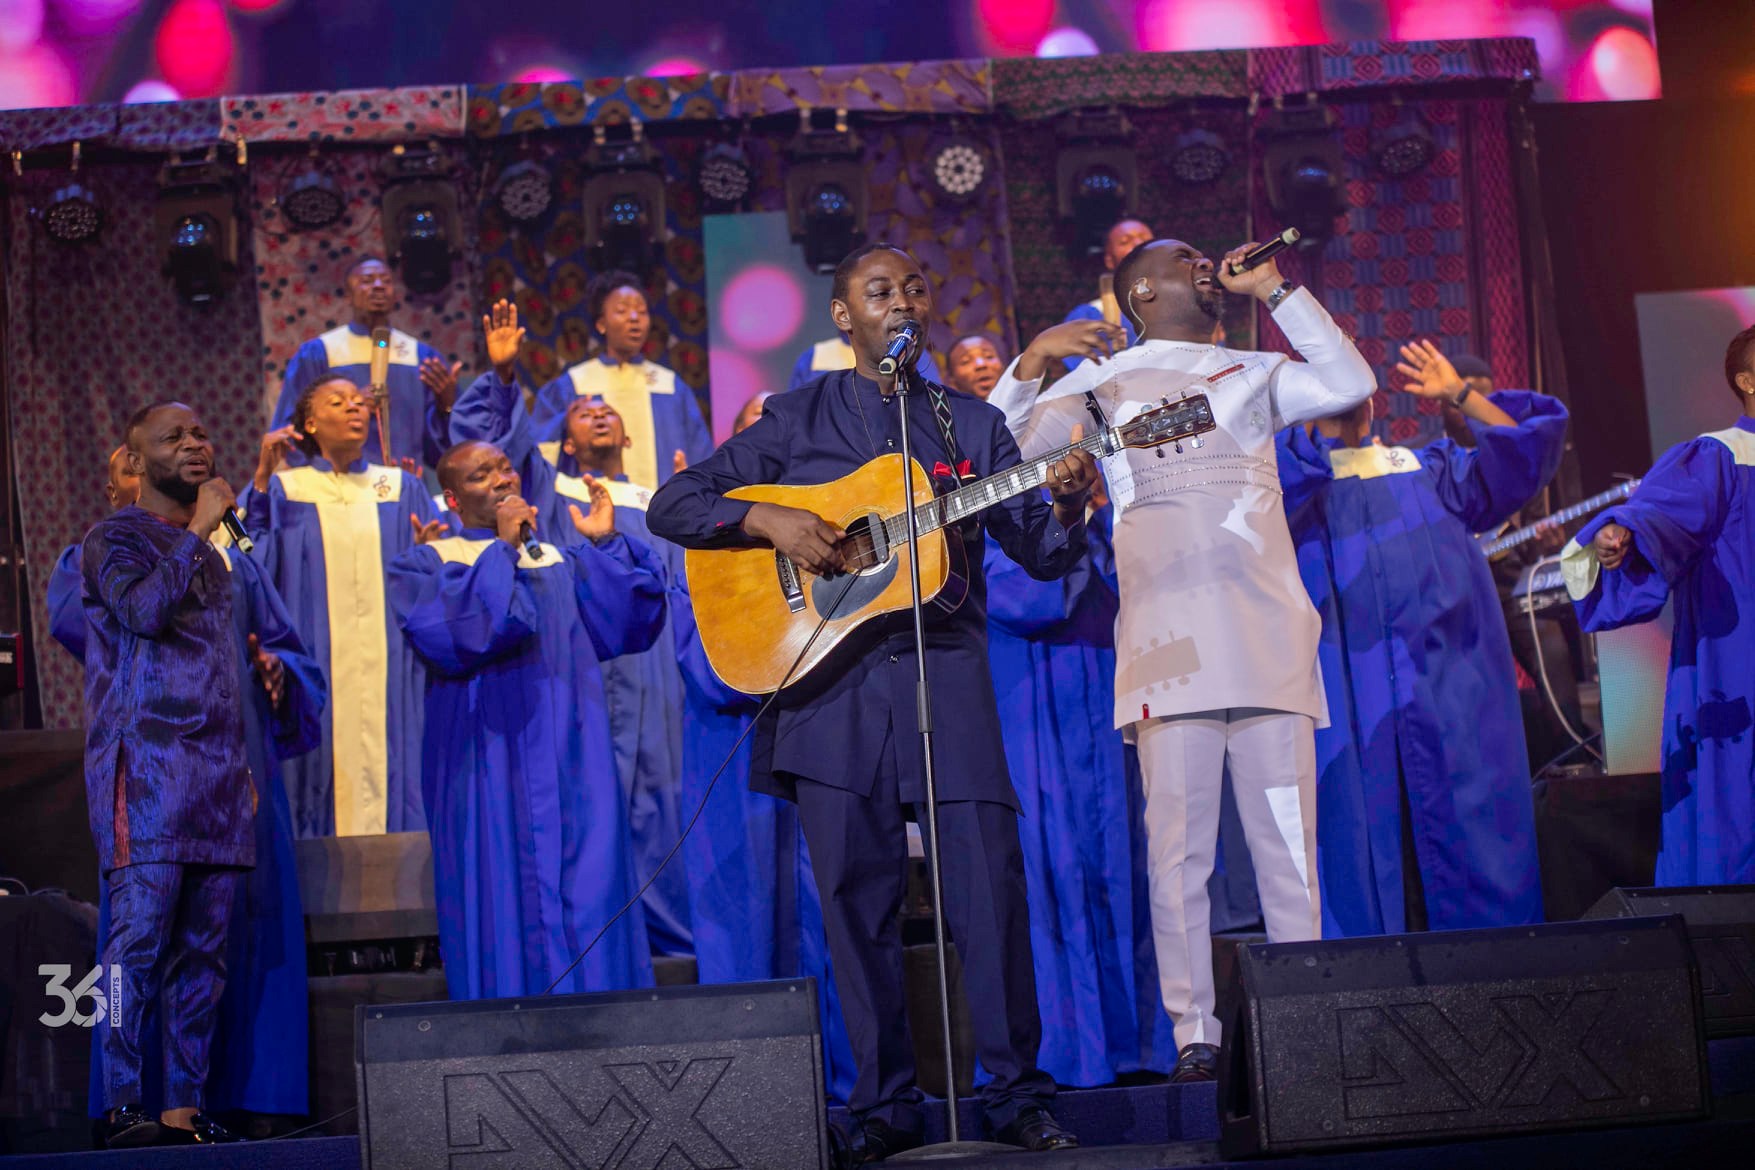 Event Review: 4 reasons why Bethel Revival Choir's Akpe Experience concert was epic